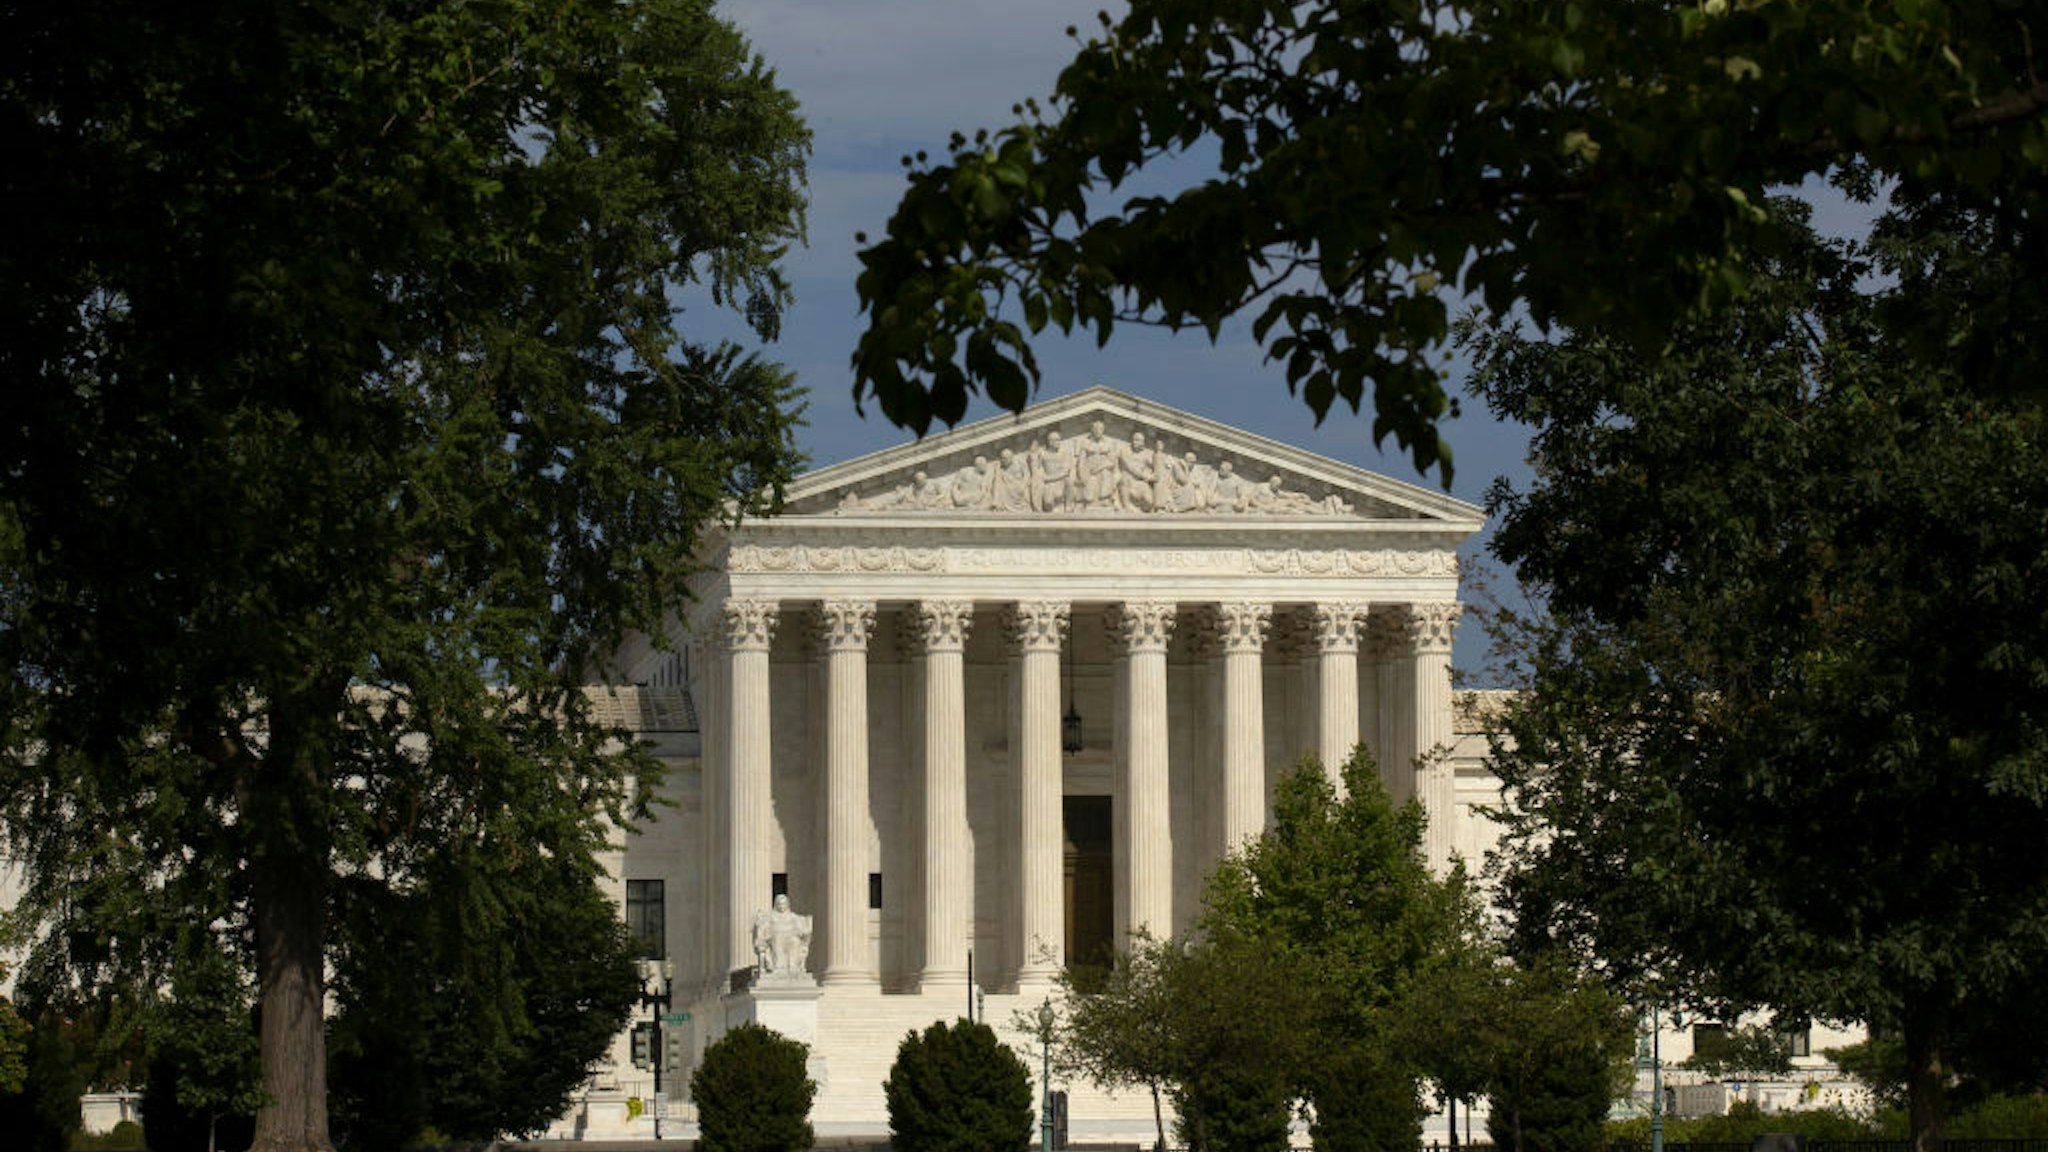 The U.S. Supreme Court stands in Washington D.C., U.S., on Monday, July 20, 2020. The Supreme Court refused to let House Democrats immediately renew their push to get President Donald Trump's financial records, rejecting their requests to return two cases to the appeals court level ahead of schedule.